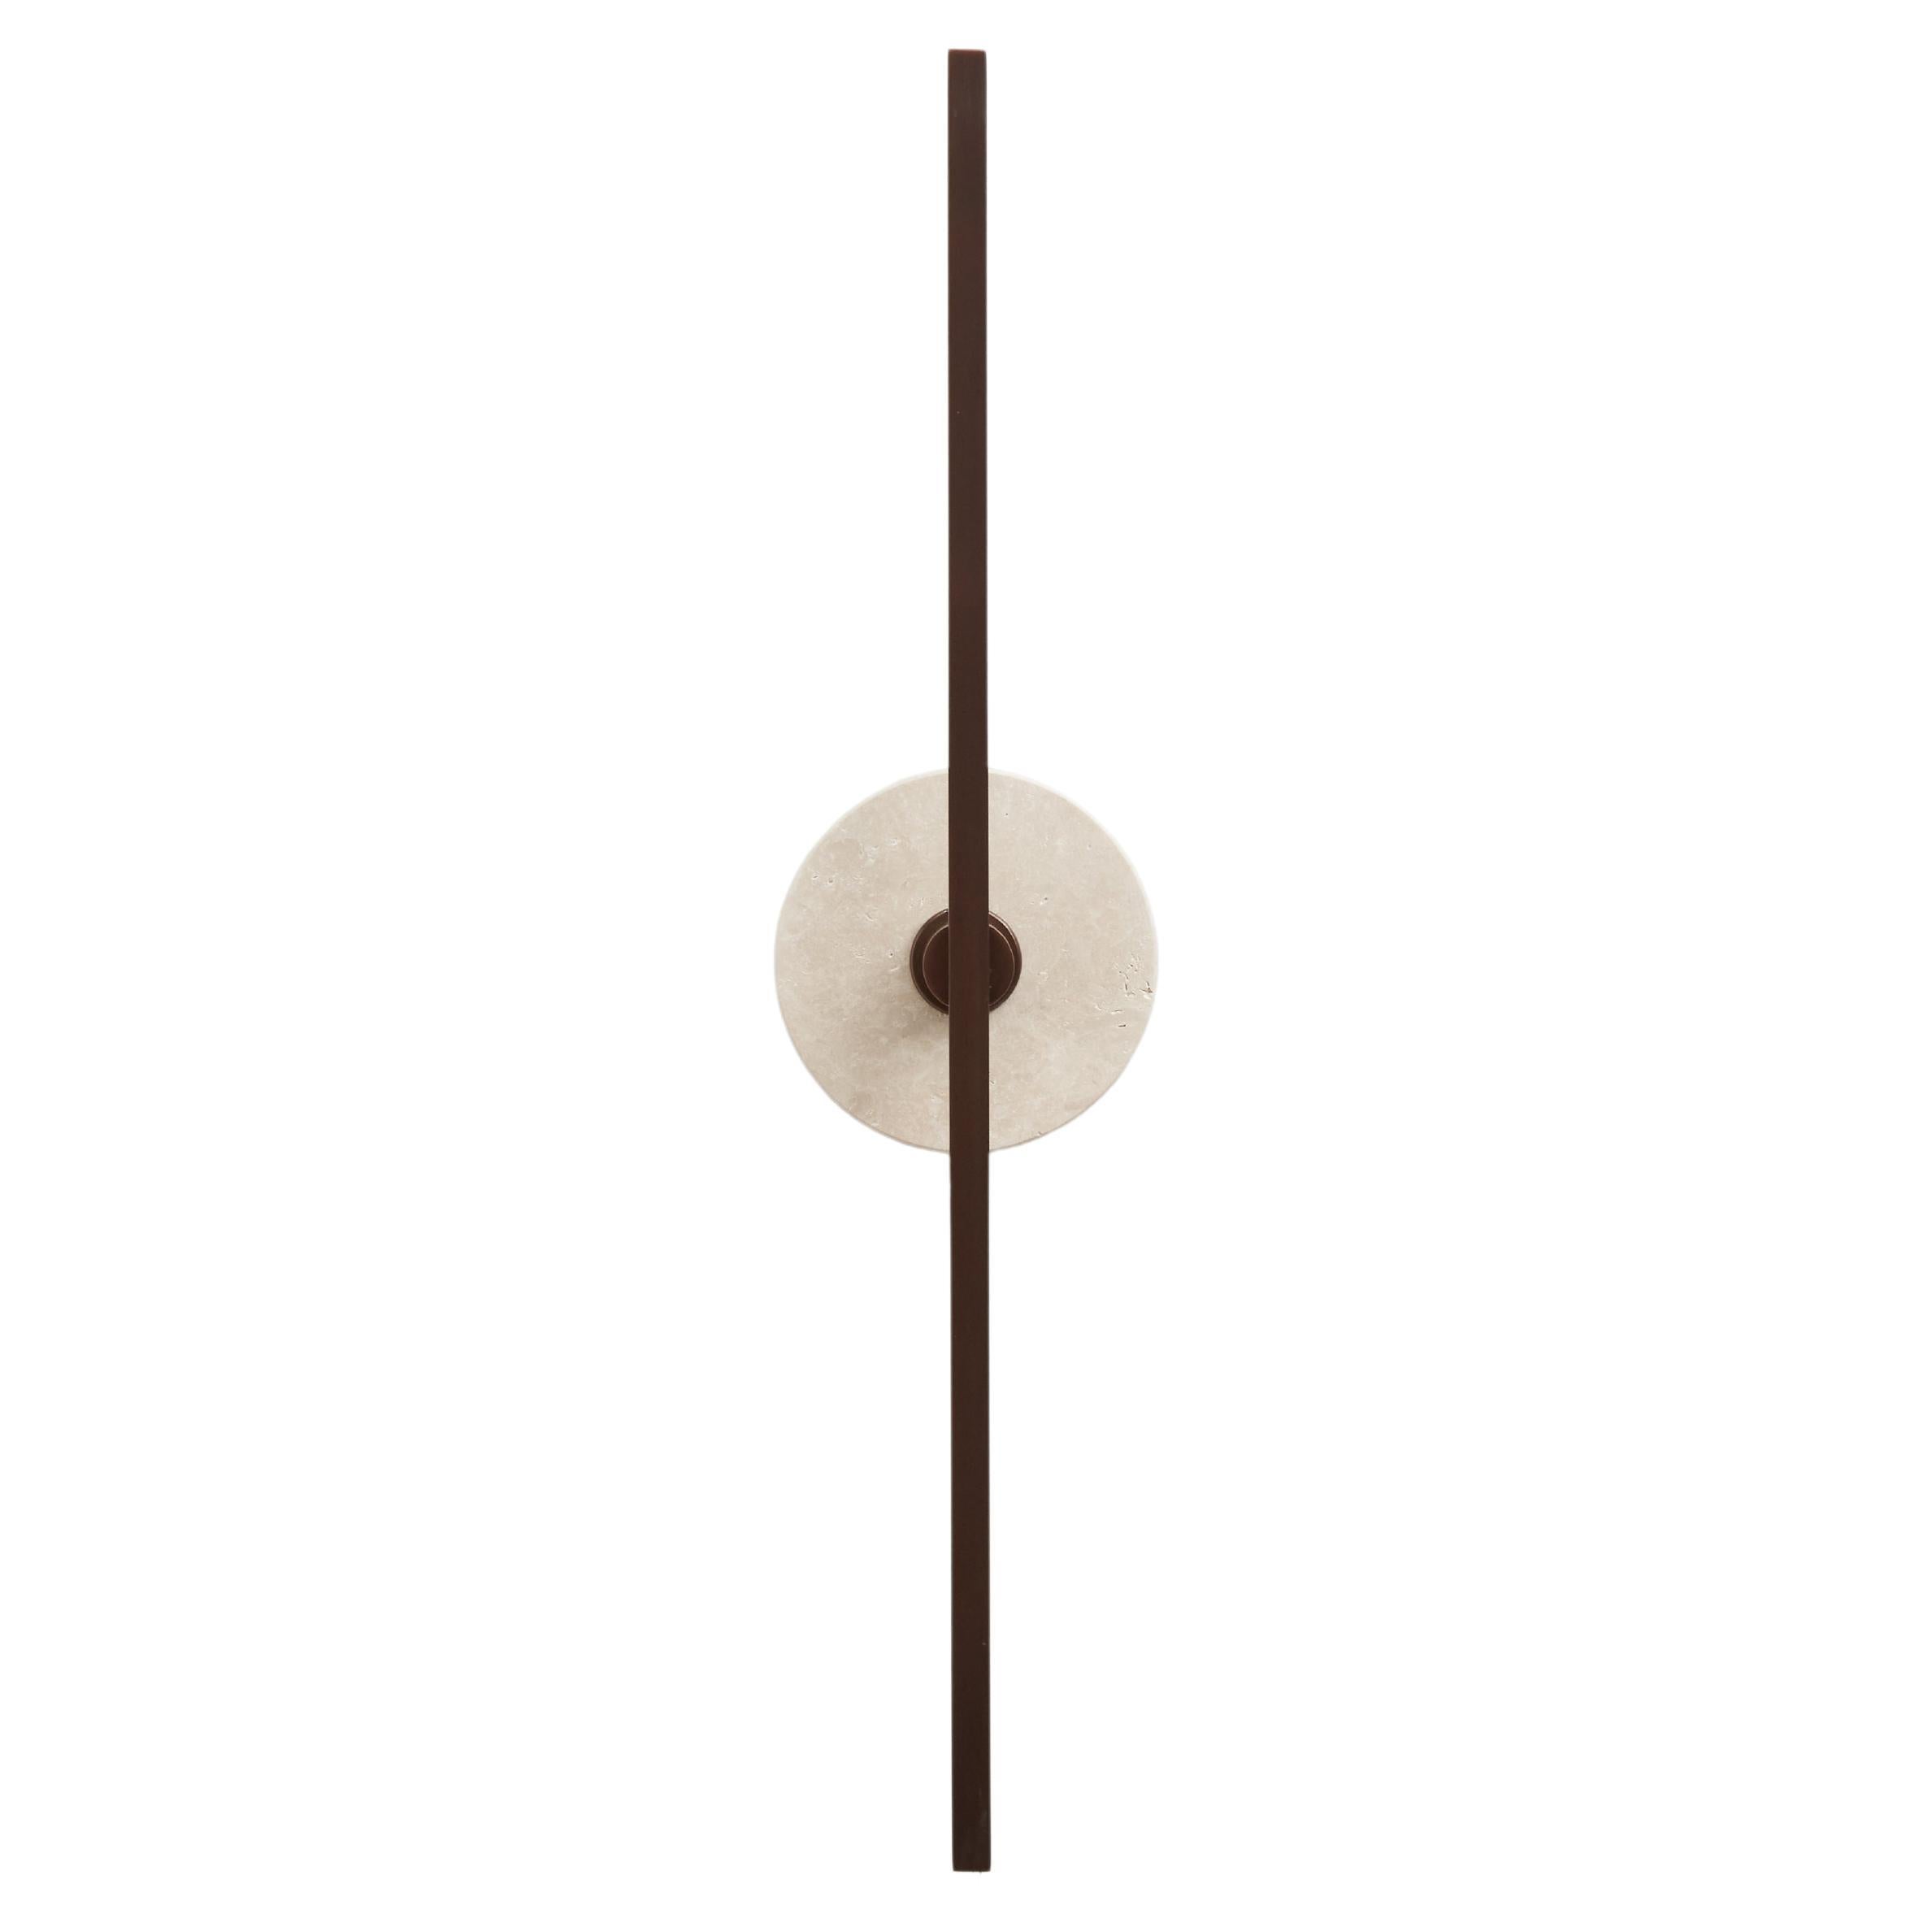 Essential Italian Wall Sconce "Stick" - Bronze and Travertine Marble For Sale